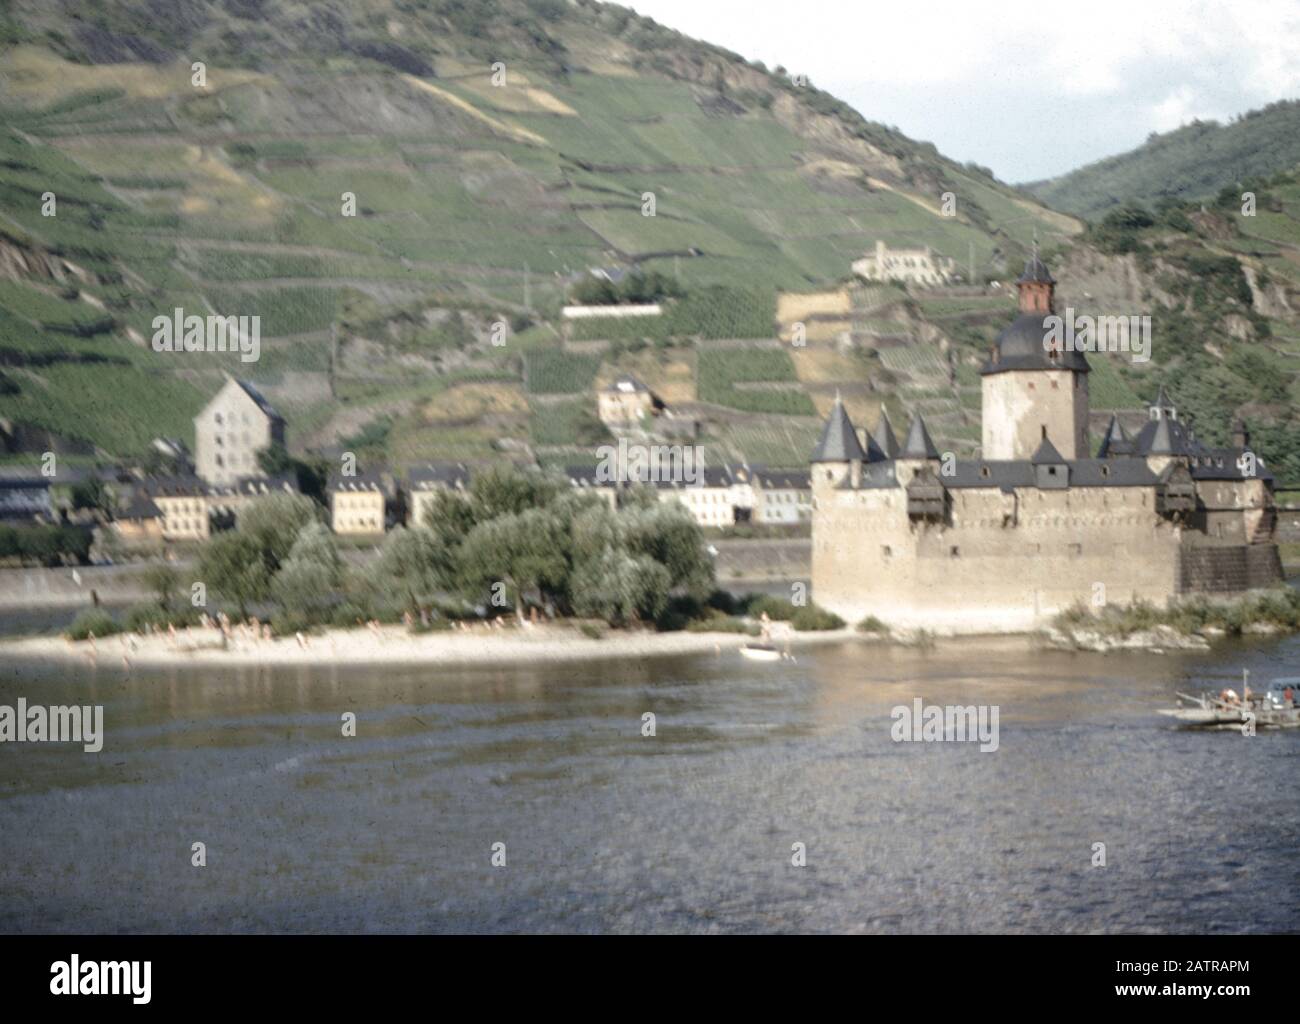 Vernacular photograph taken on a 35mm analog film transparency, believed to depict white concrete building near body of water during daytime, 1965. Major topics/objects detected include Water, River, Fortress, Castle, Fortification, Building and Gray Color. () Stock Photo